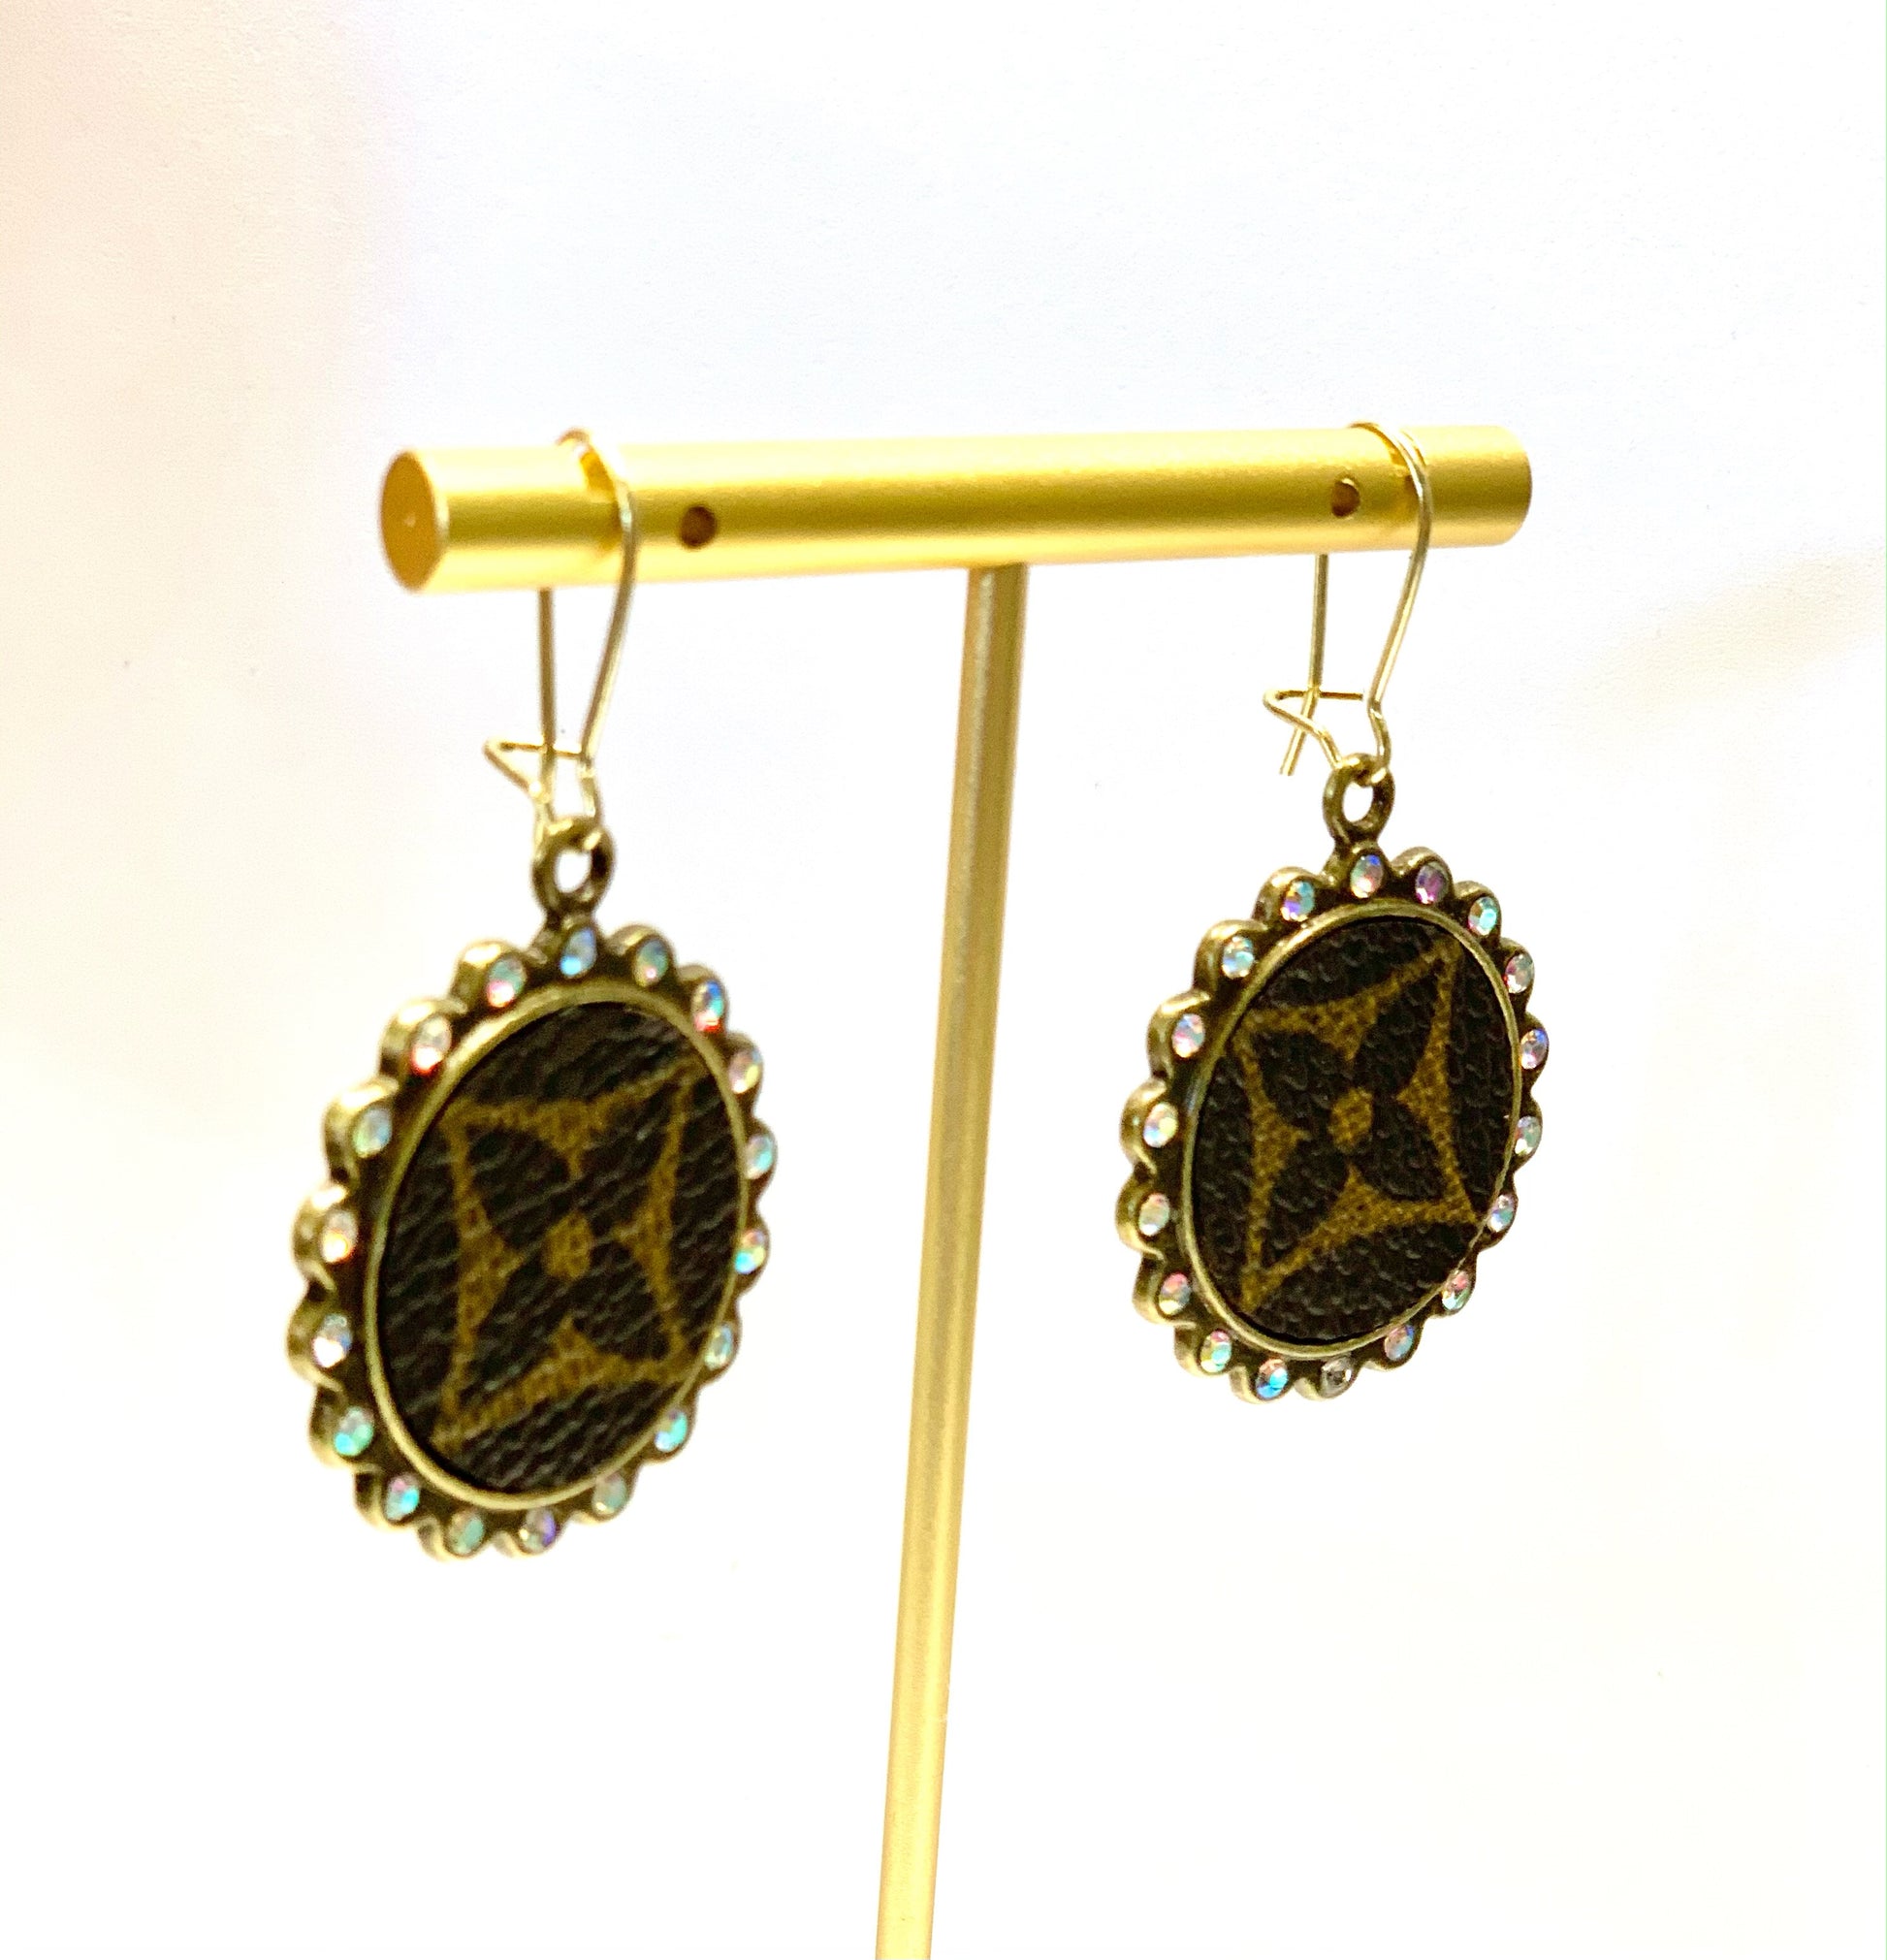 Flourish earrings - Patches Of Upcycling